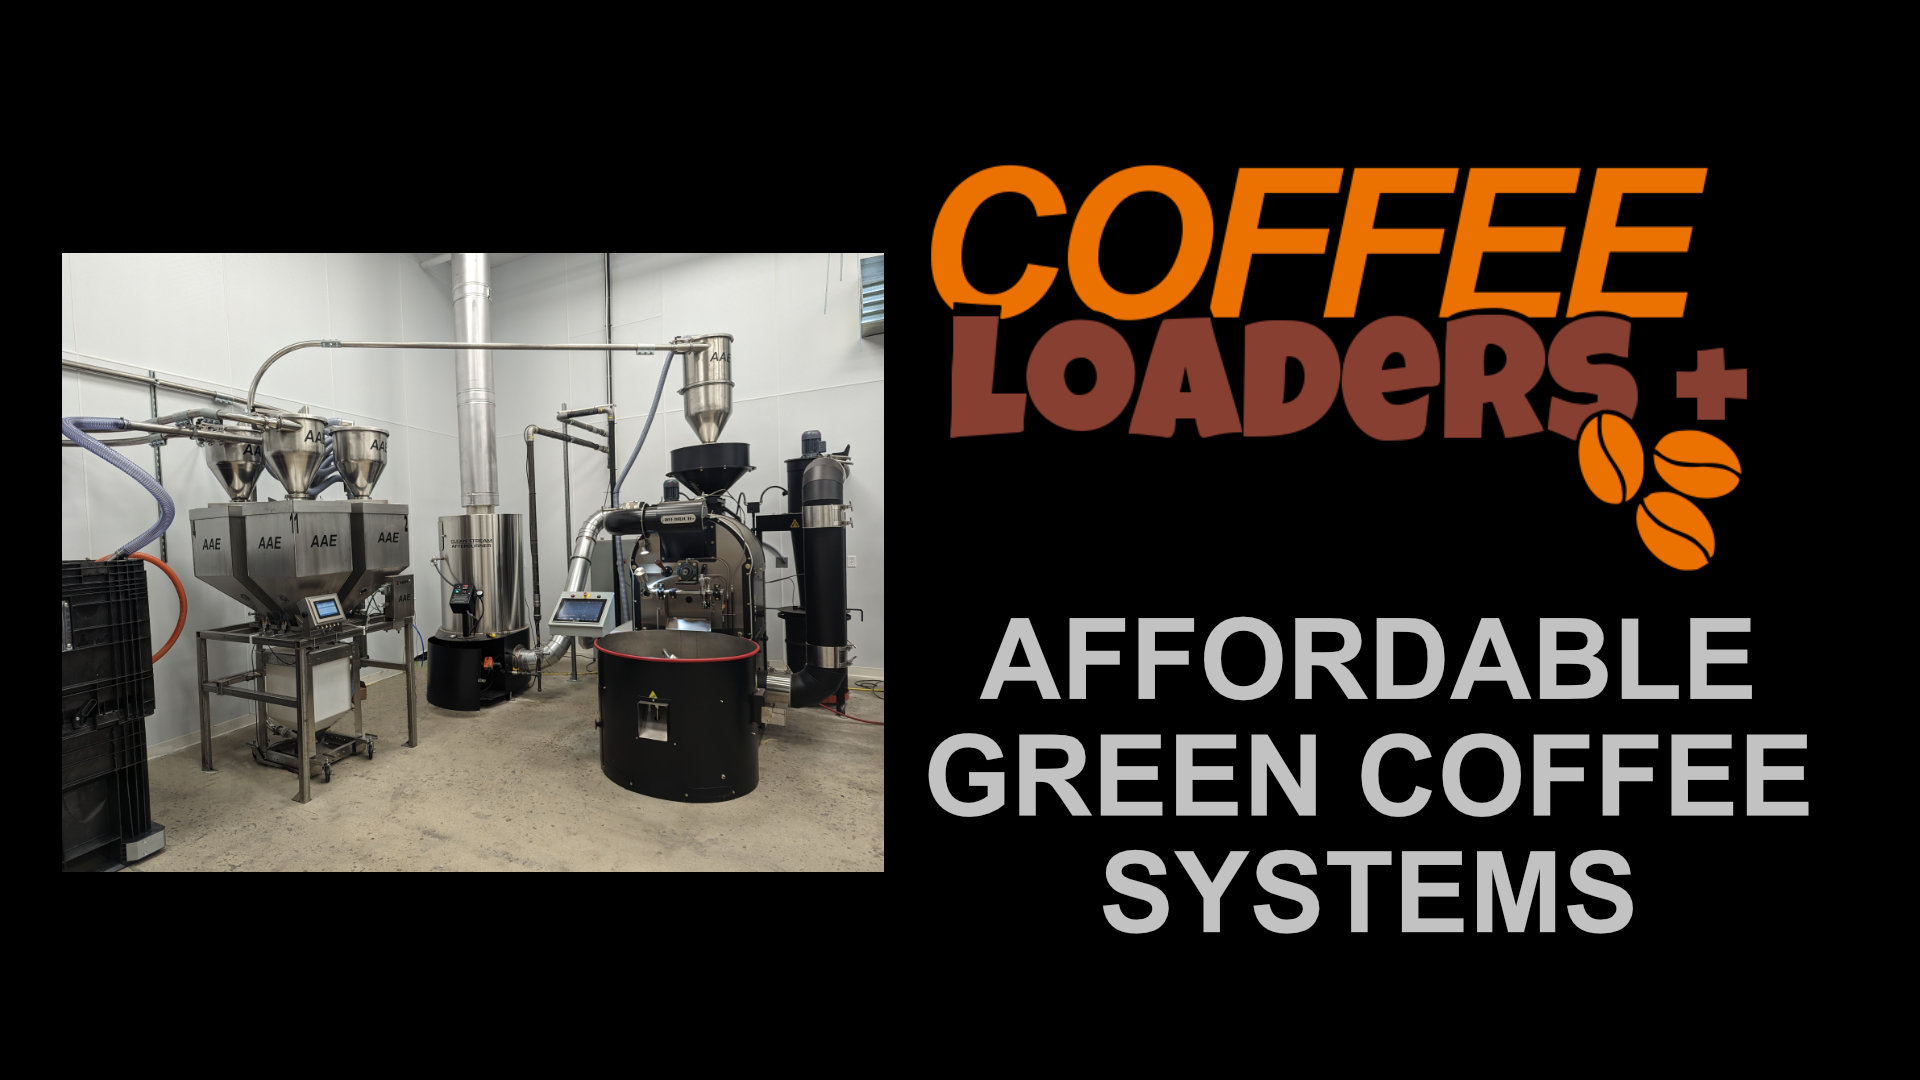 GREEN COFFEE CONVEYING SYSTEMS